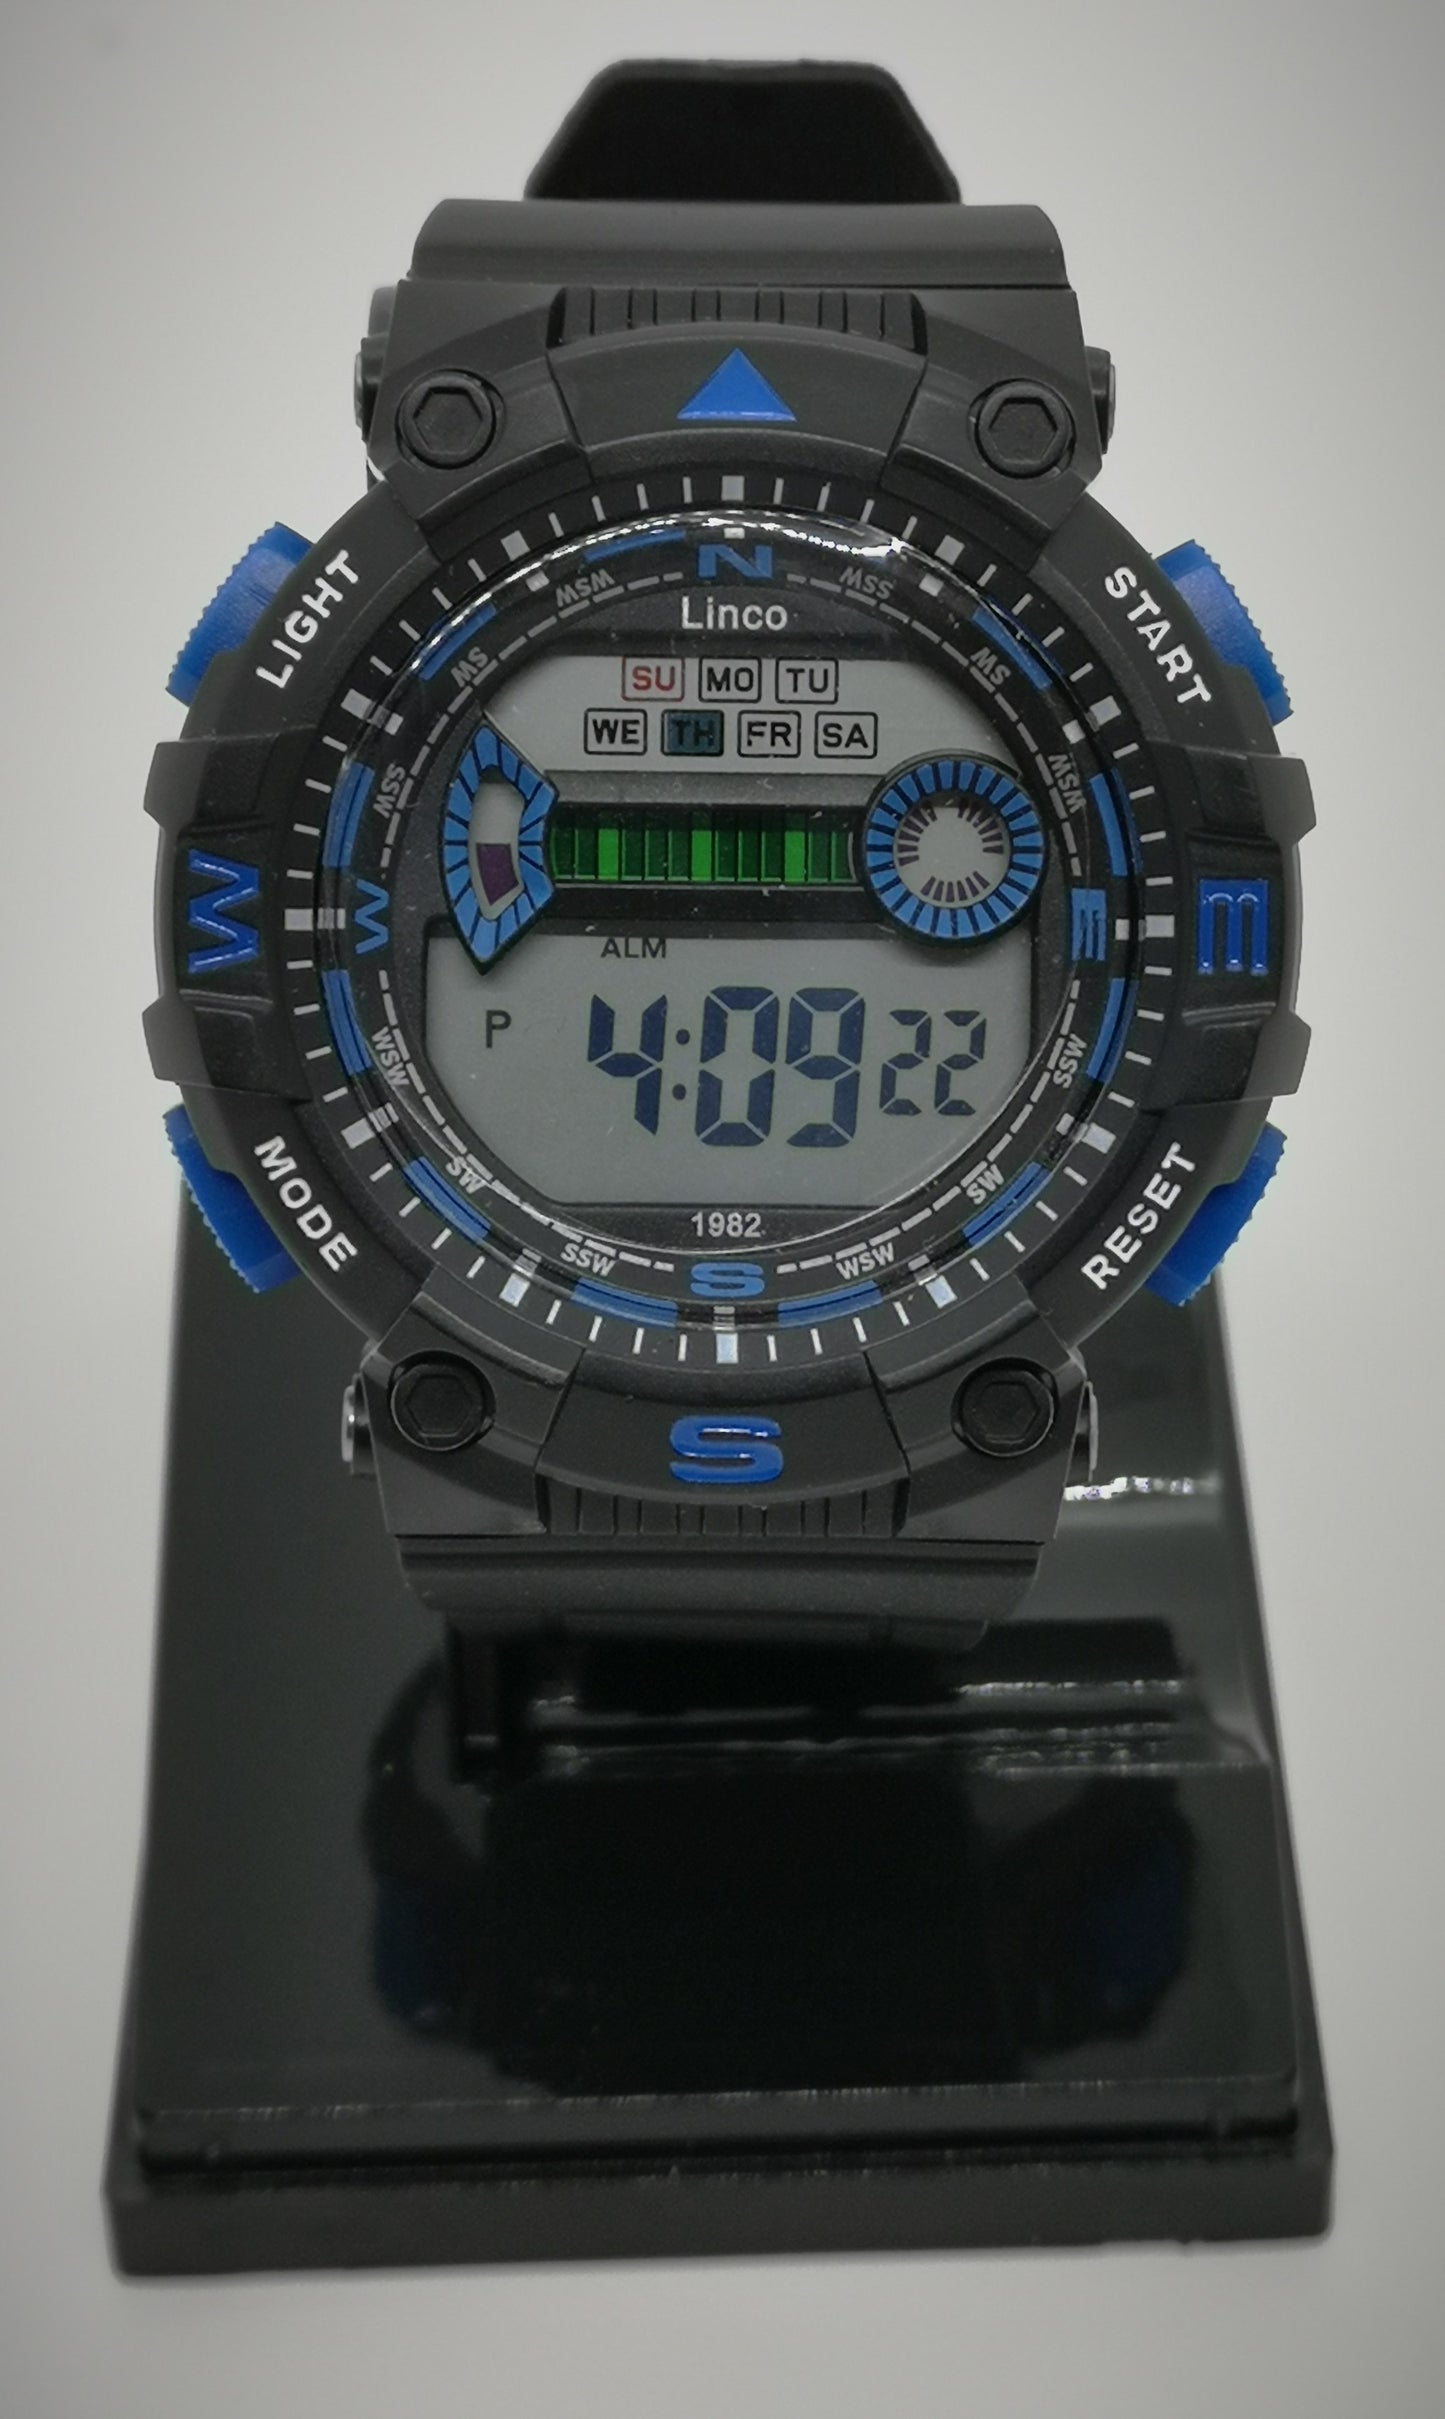 Digital black and blue watch with large 4.5cm face